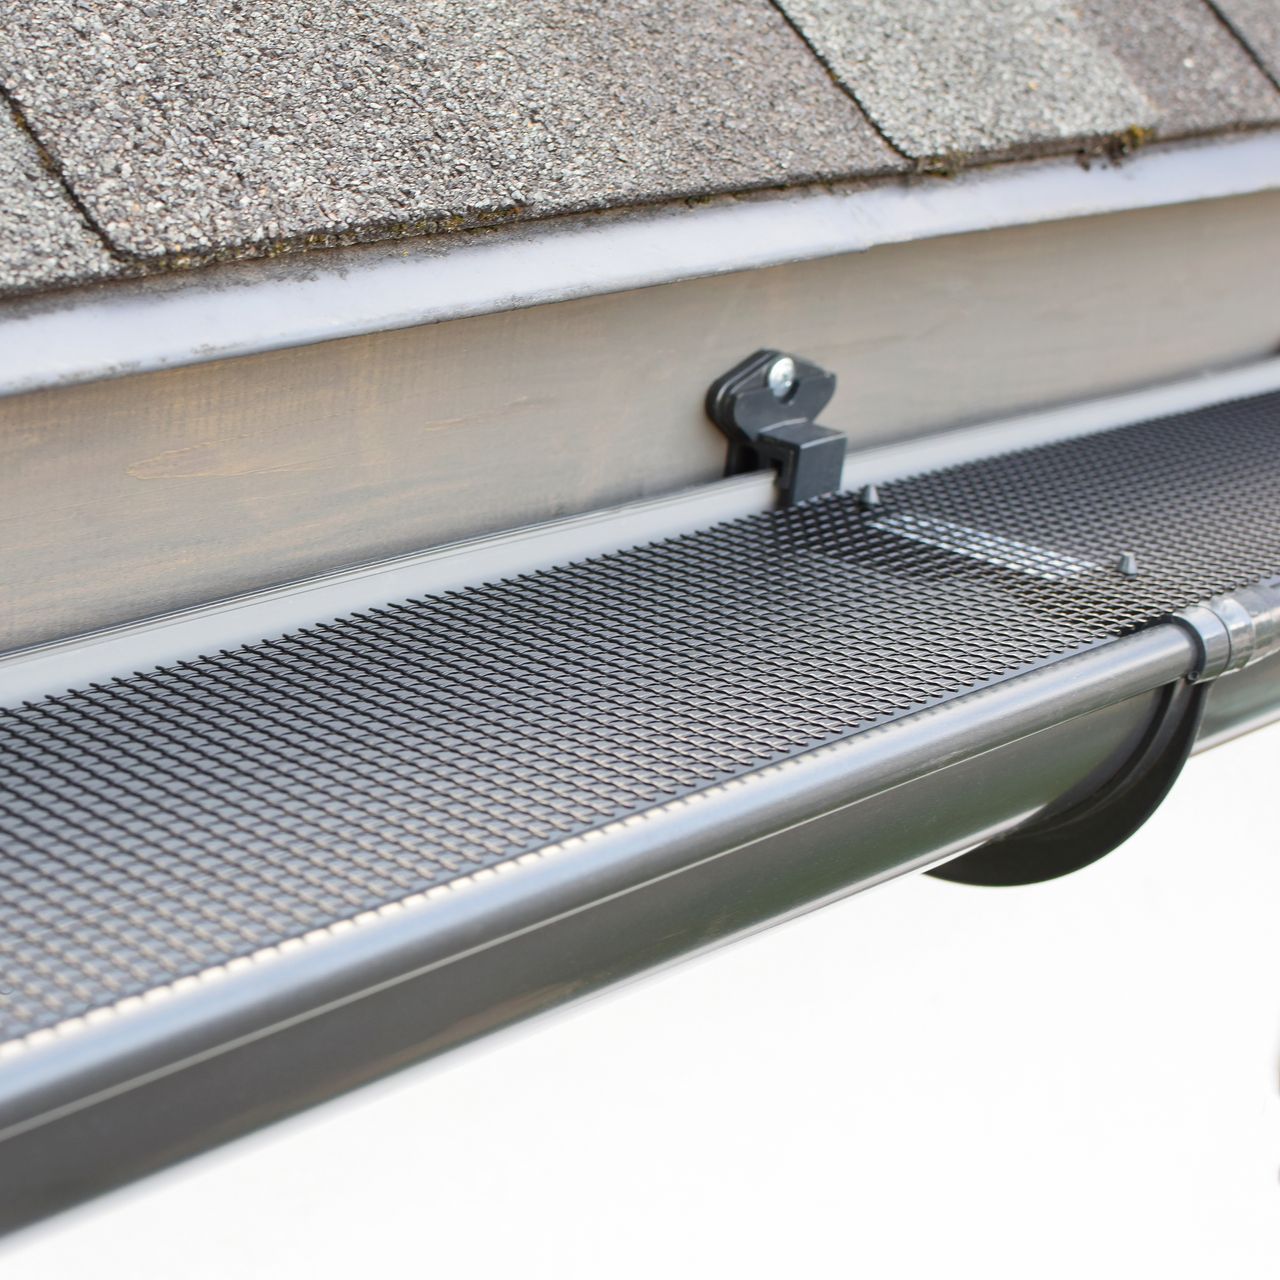 A gutter with a mesh screen attached to it